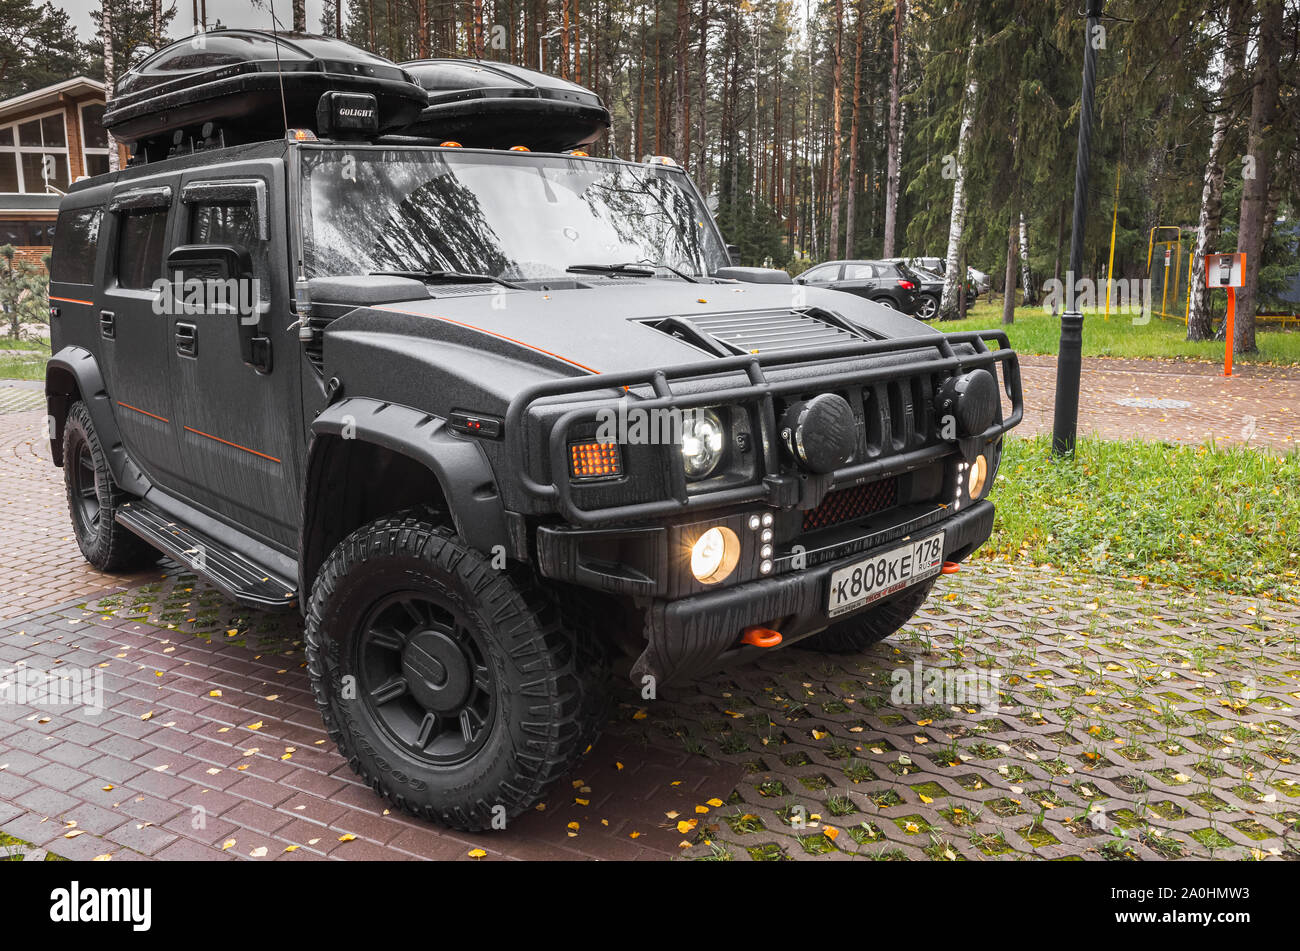 Saint-Petersburg, Russia - October 8, 2017: Black Hummer H2 car stands on rural parking lot in Russian countryside, side view Stock Photo